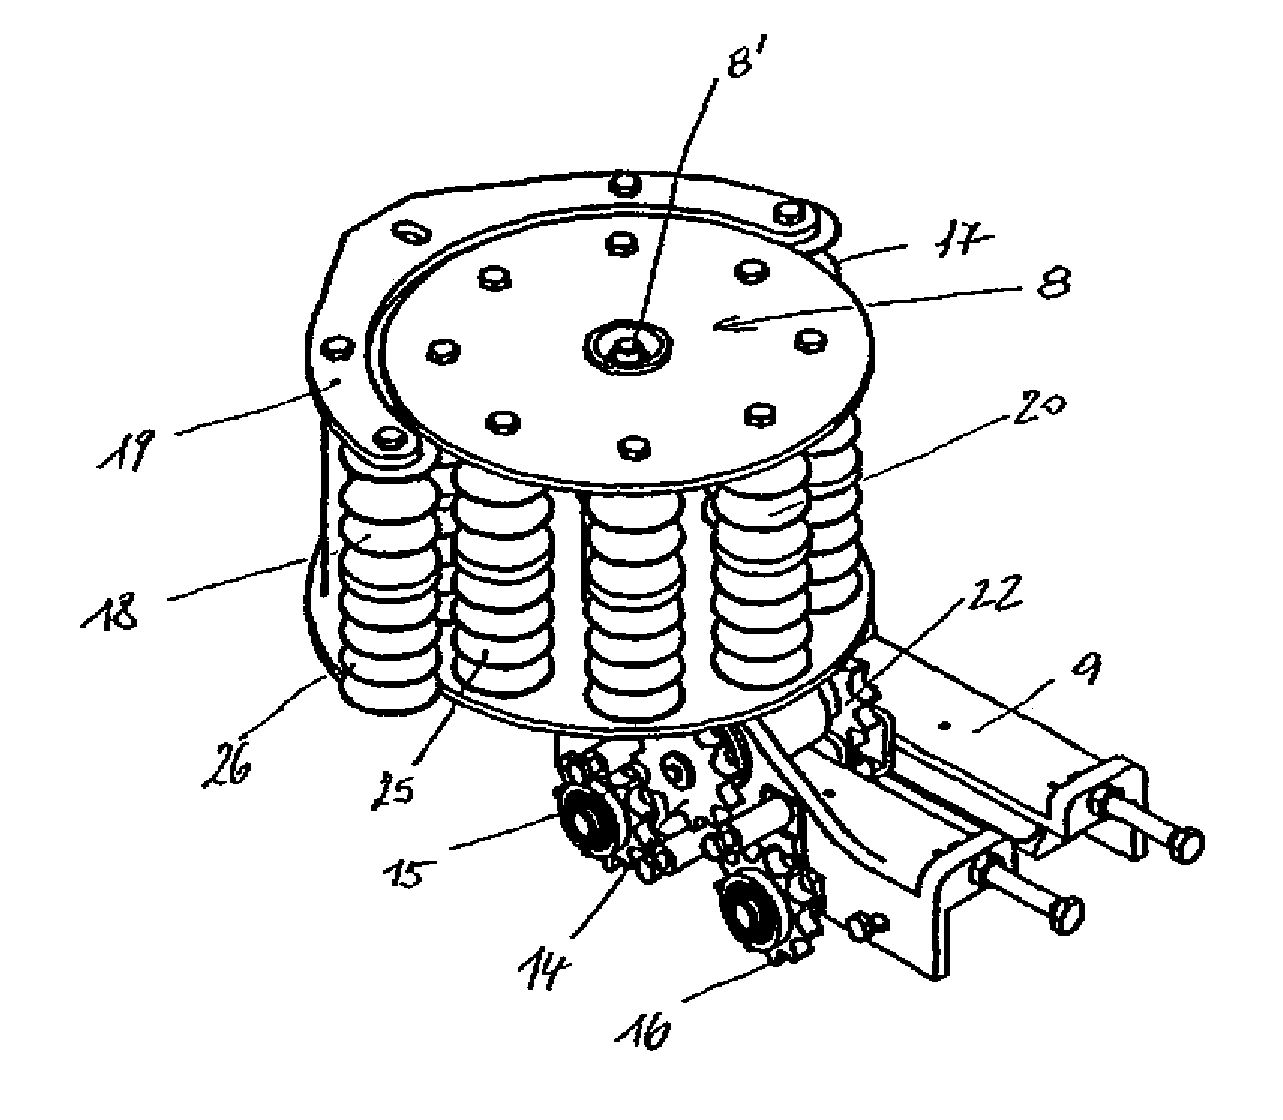 Device for guiding and tensioning supply lines